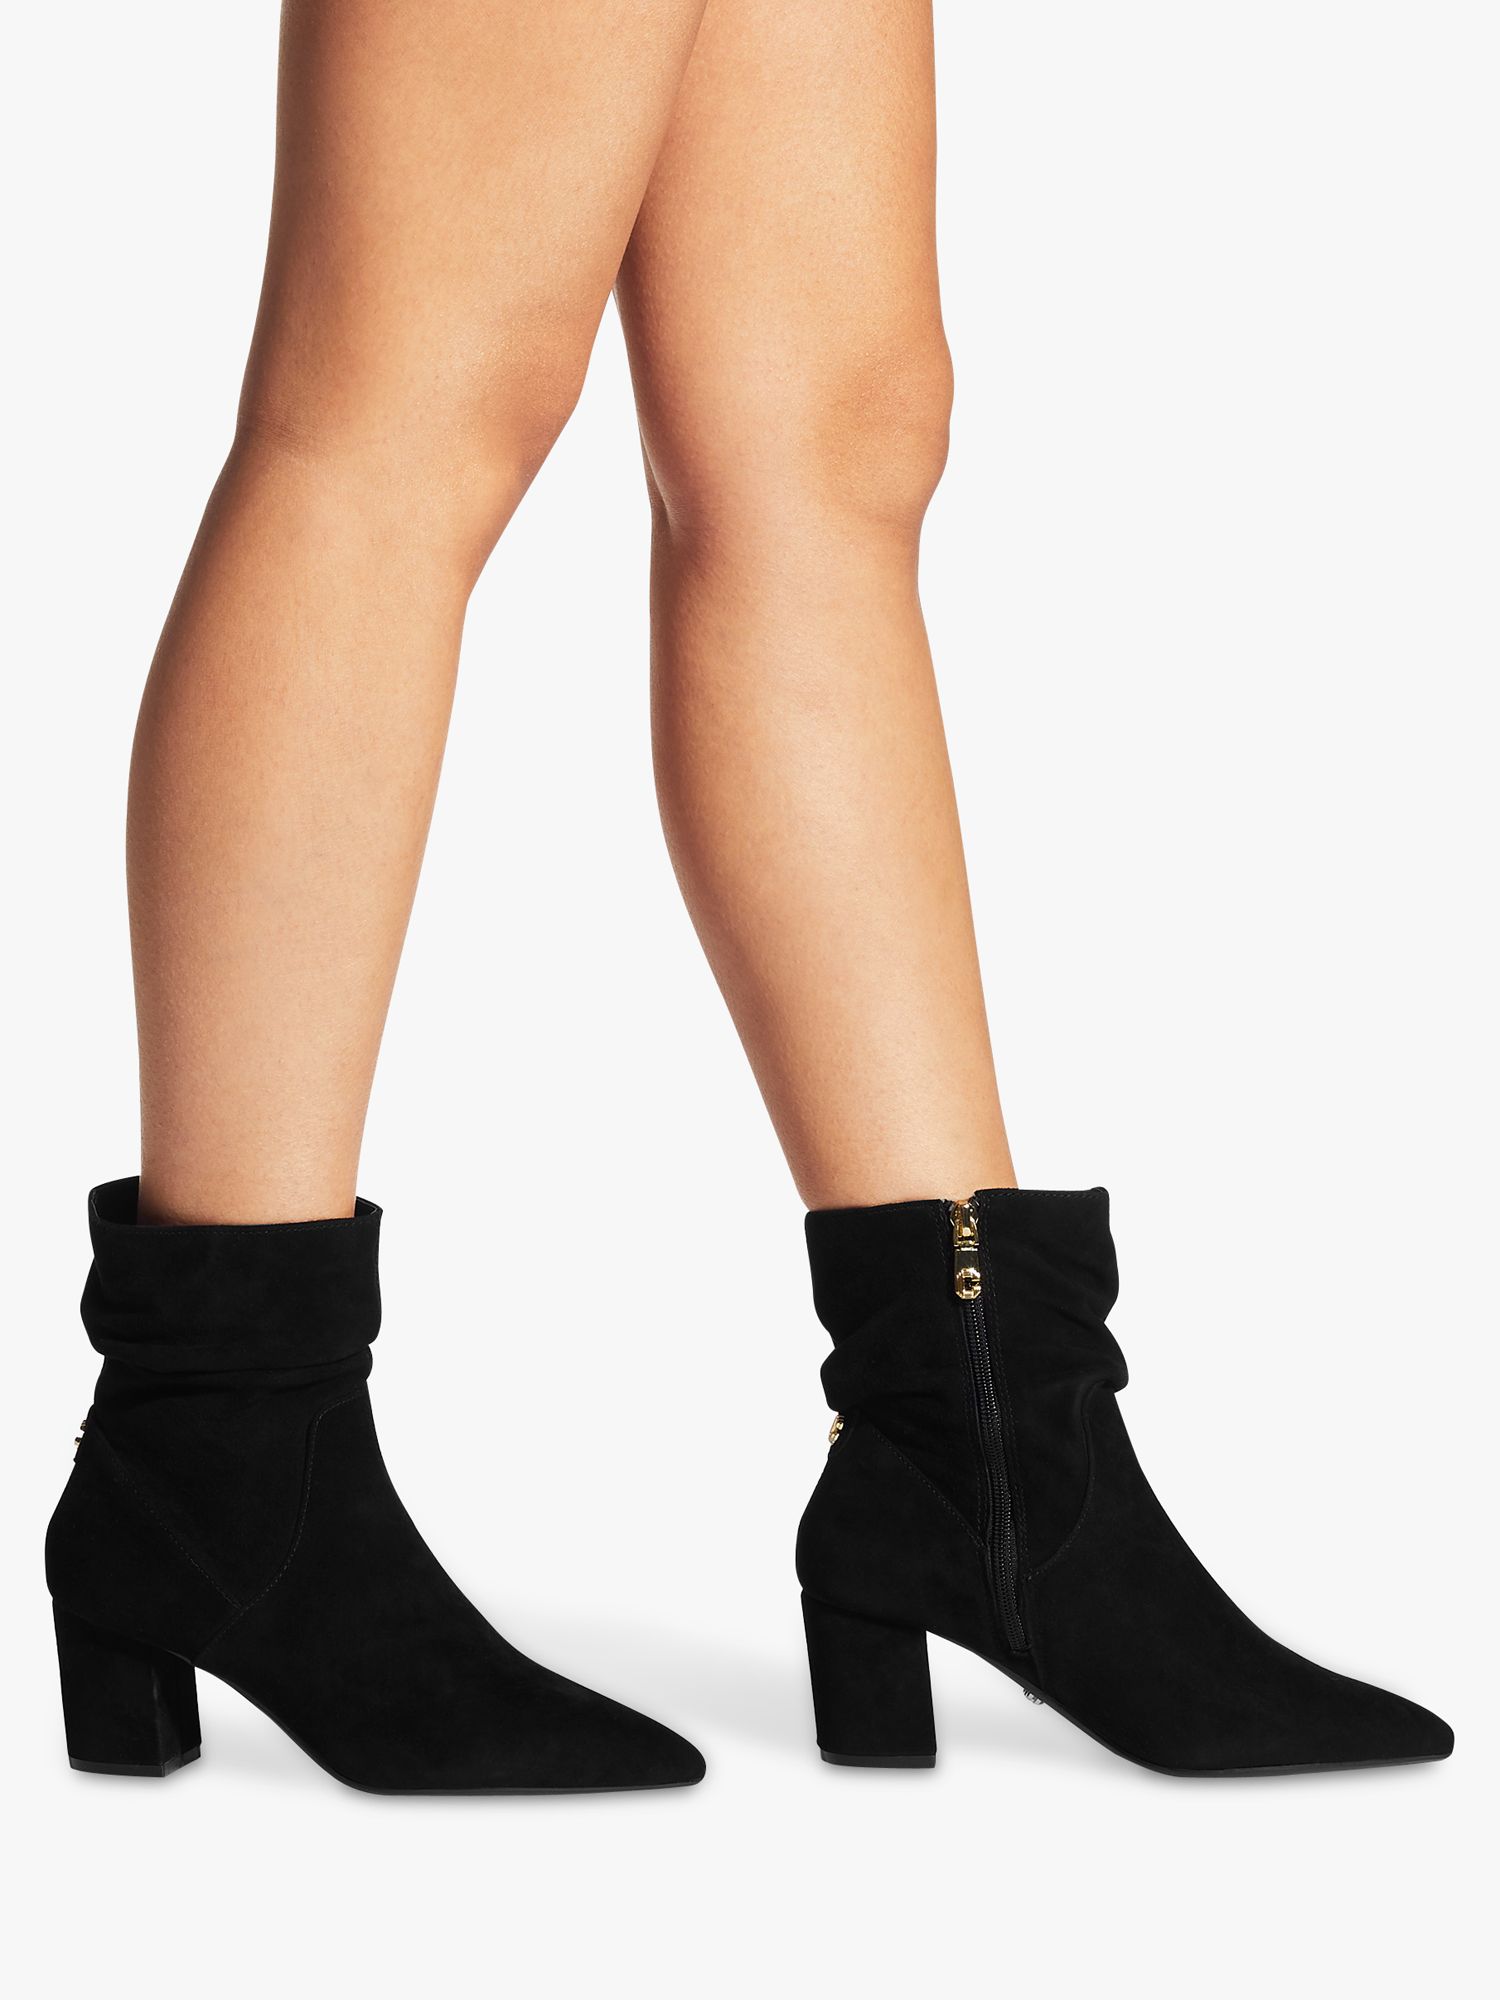 Carvela Admire Low Slouch Suede Ankle Boots, Black, 3